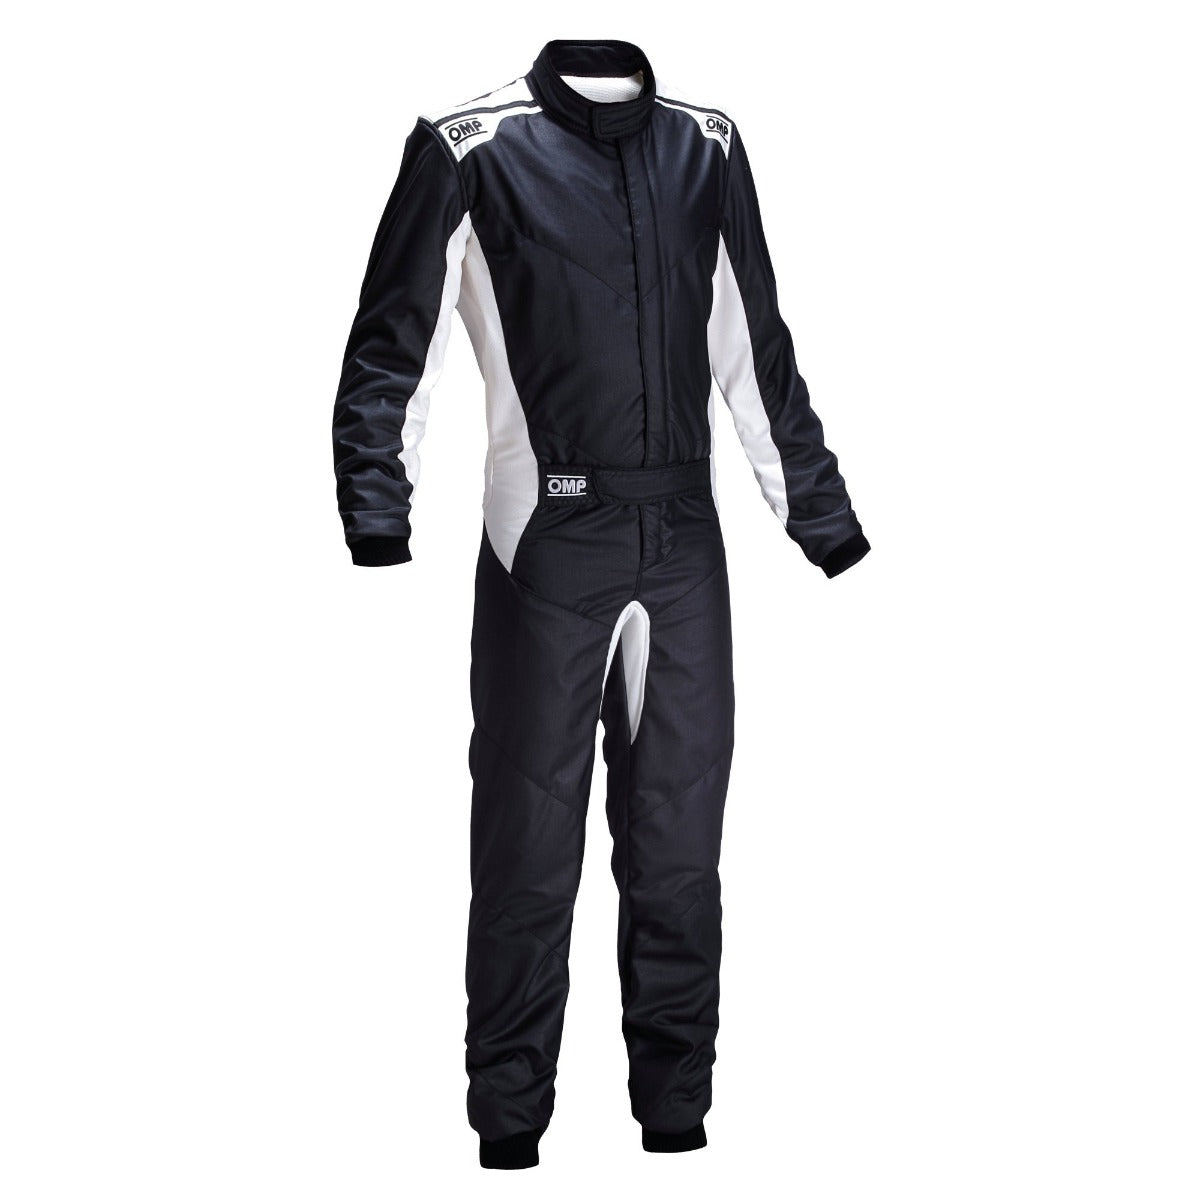 OMP ONE-S Racing Fire Suit Black Front Image CLEARANCE SALE Lowest Price and biggest discount